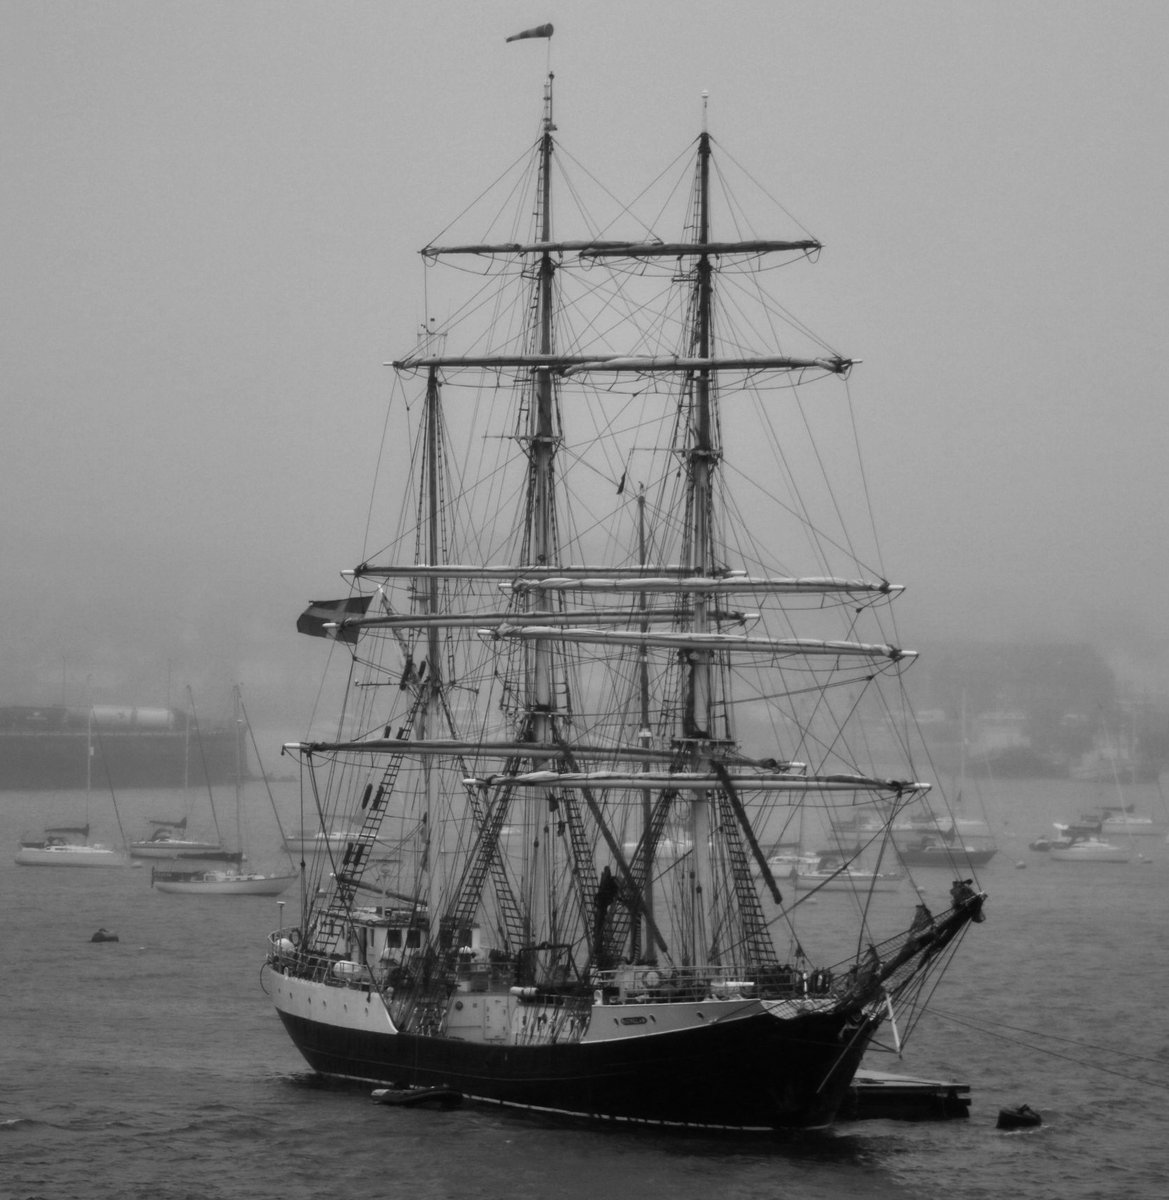 Swedish Tall Ship GUNILLA arrived in the mist & rain now berthed near Mount Batten. The 3 masted barque sailing ship was a former cargo vessel built in 1940 & re-built as a sailing vessel in 1997 for training young people.
westwardshippingnews.com 
contact@westwardshippingnews.com